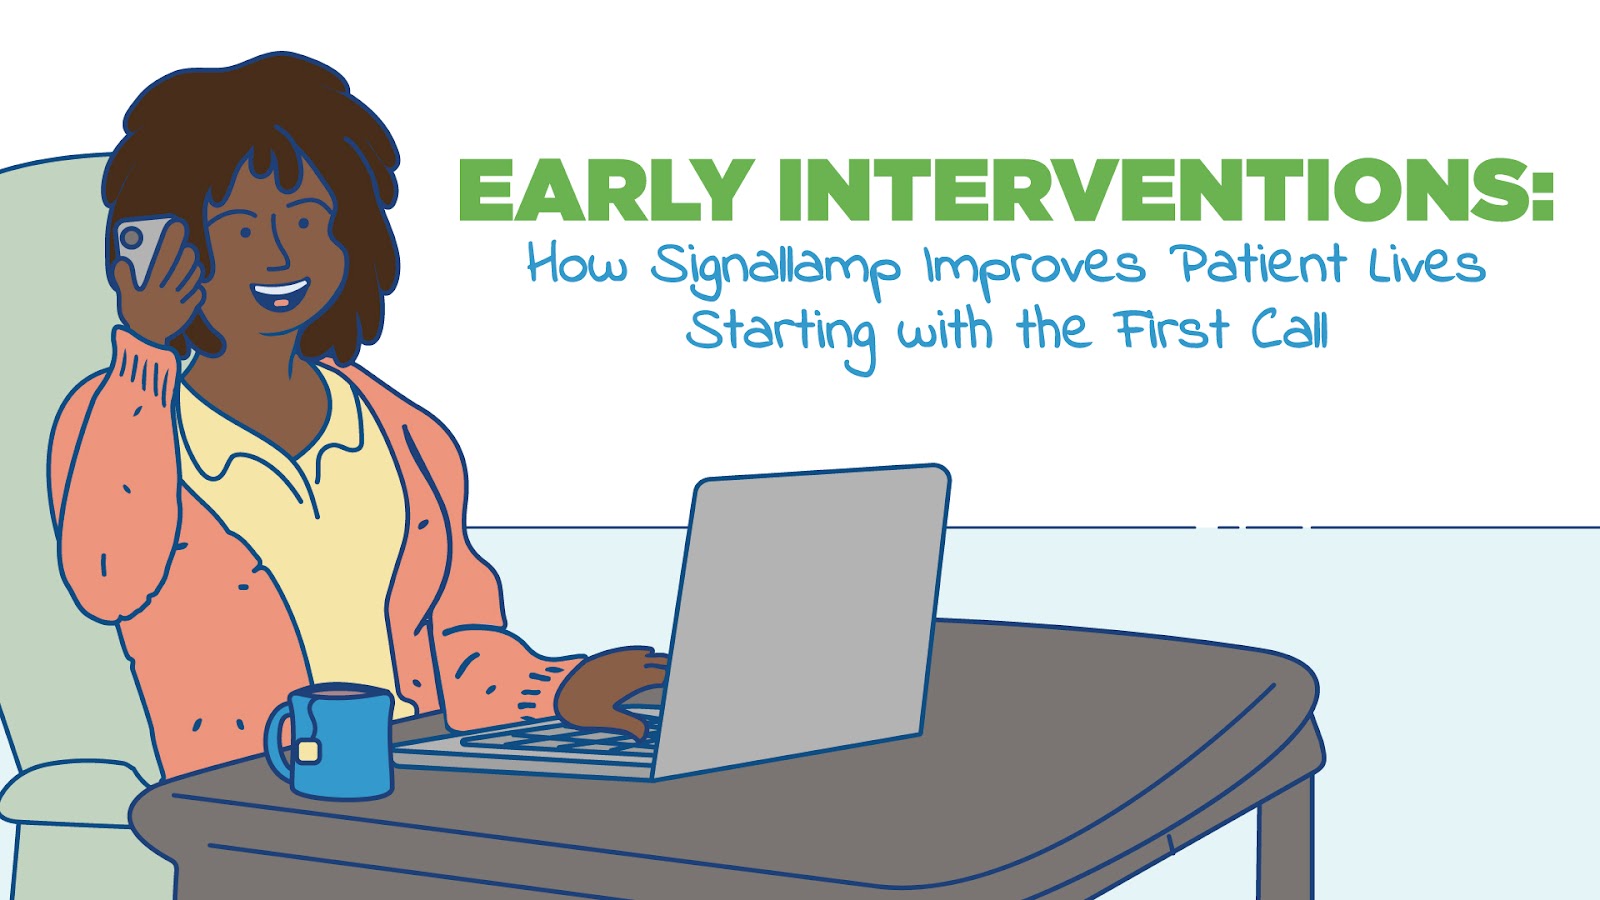 Early Interventions: How Signallamp Improves Patient Lives Starting with the First Call